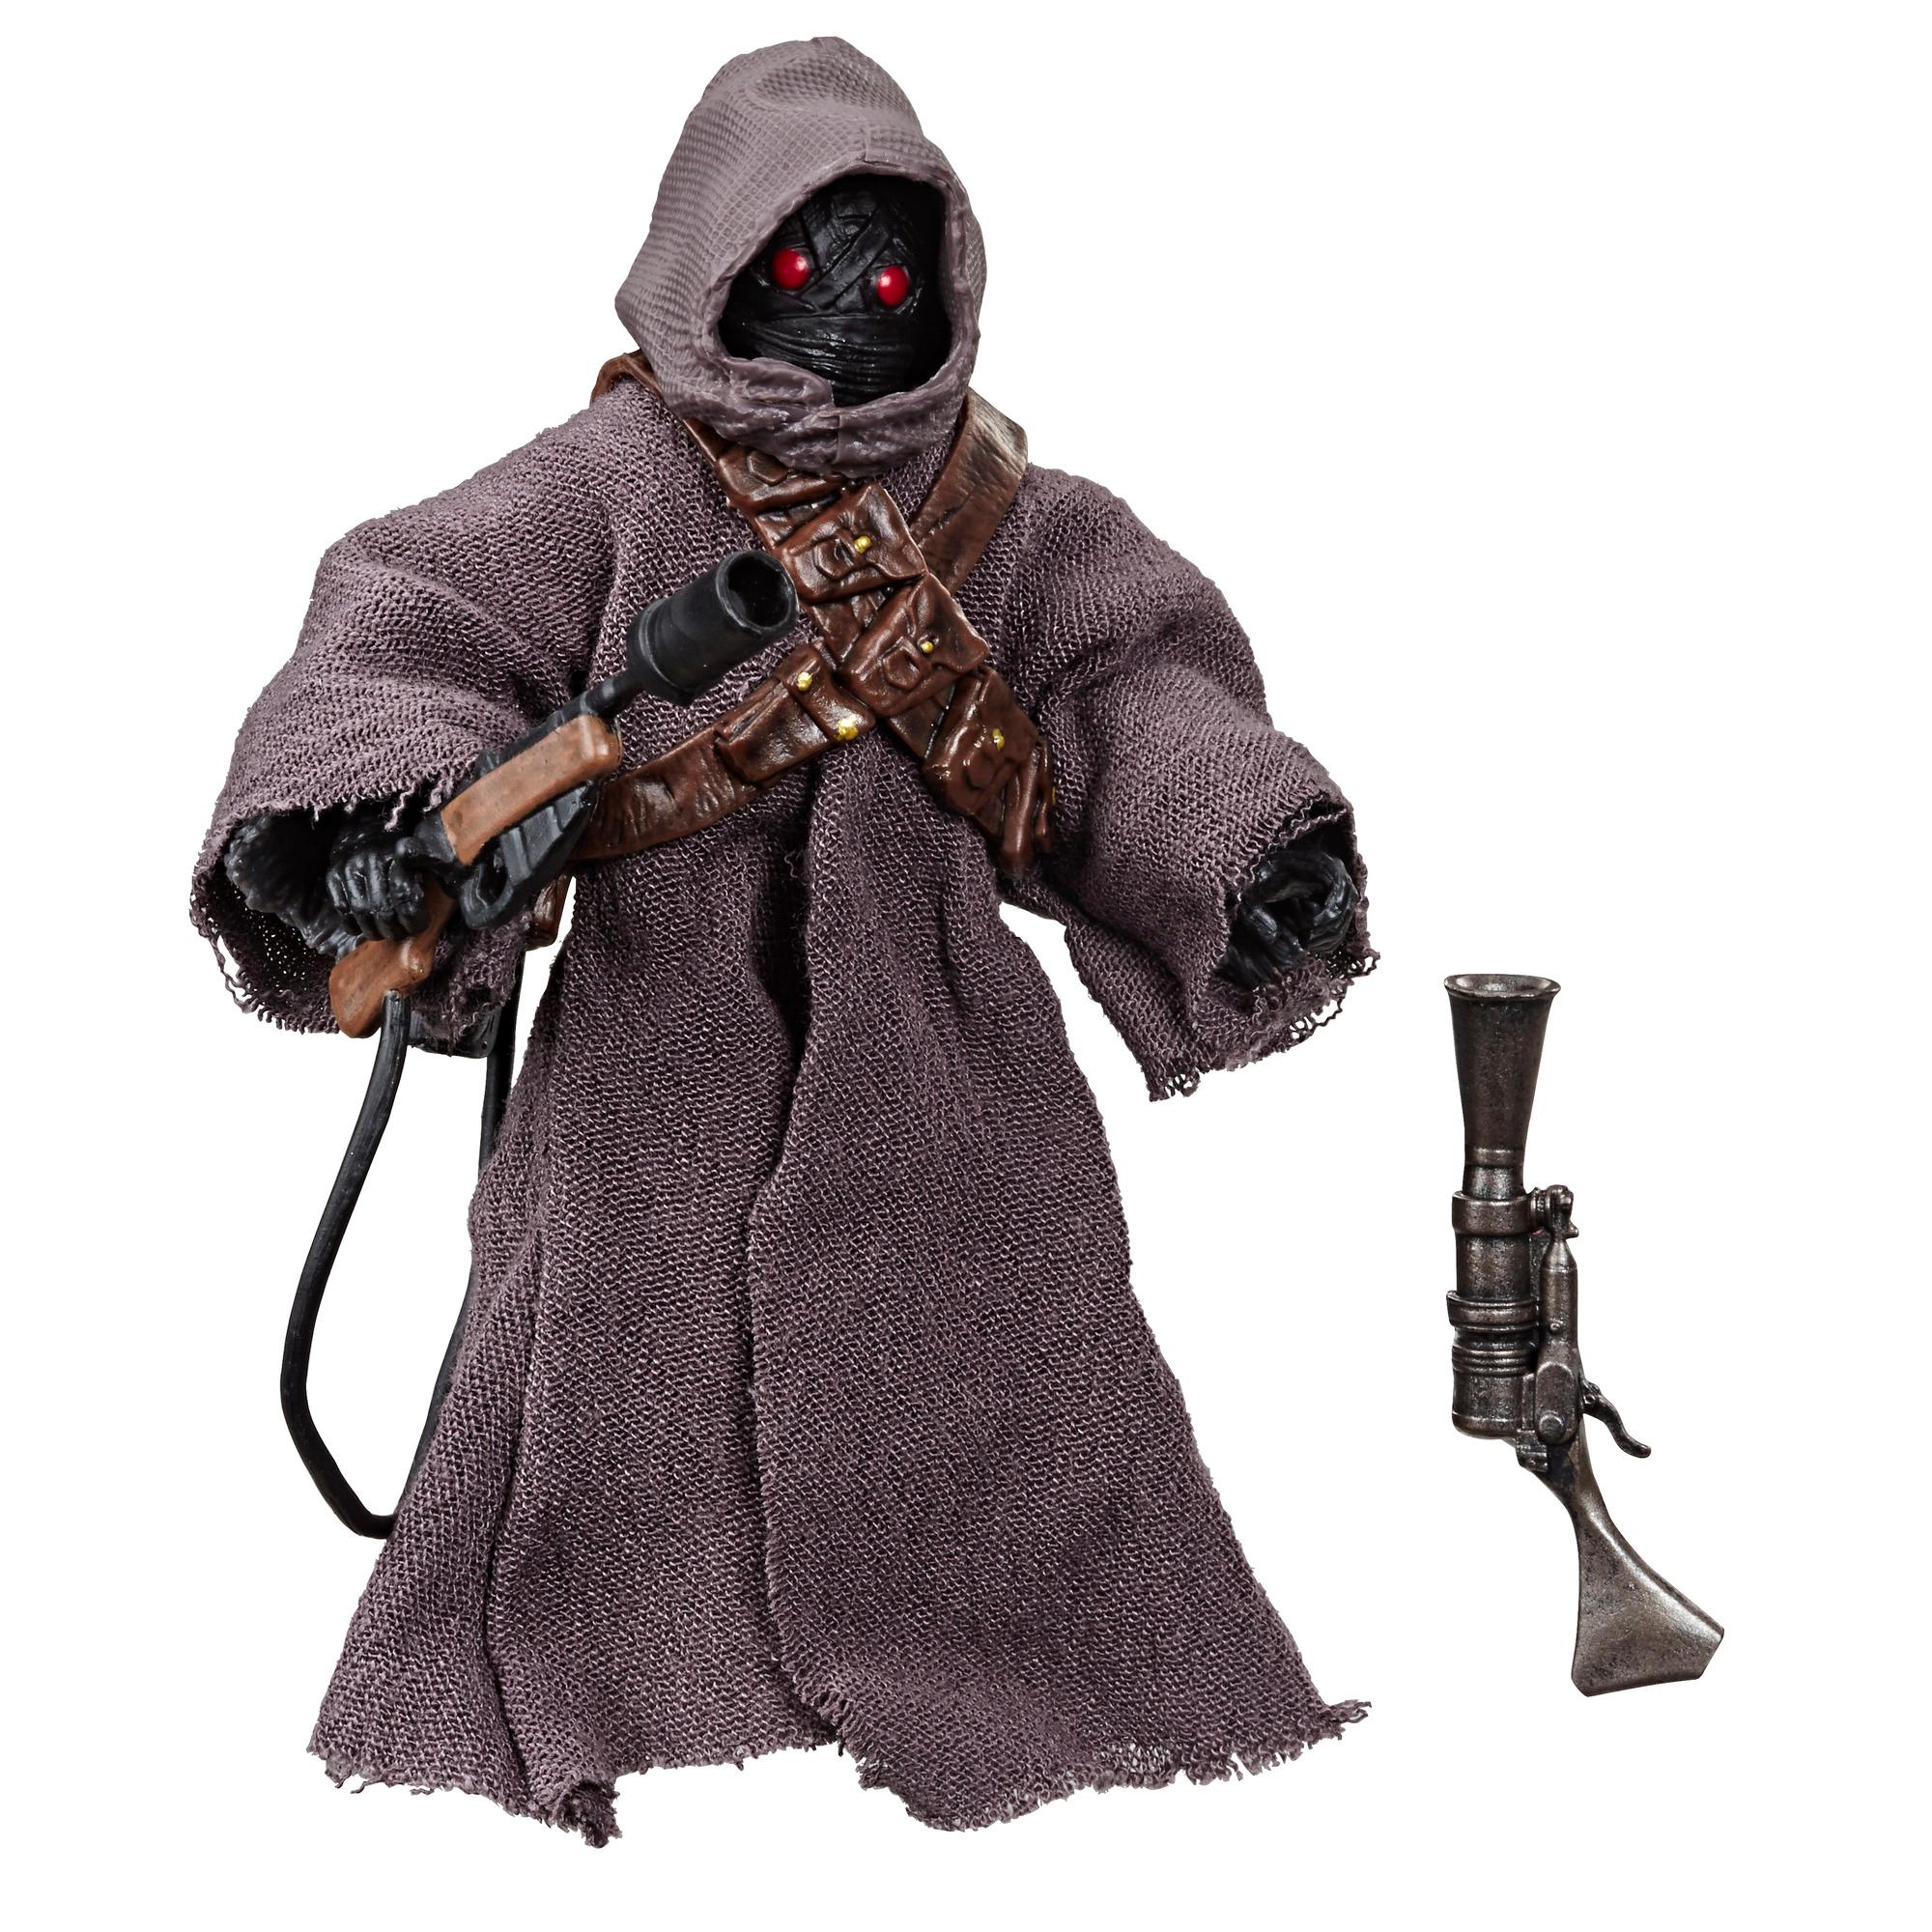 Star Wars The Black Series 6" Scale Jawa ANH Action Figure Hasbro New 